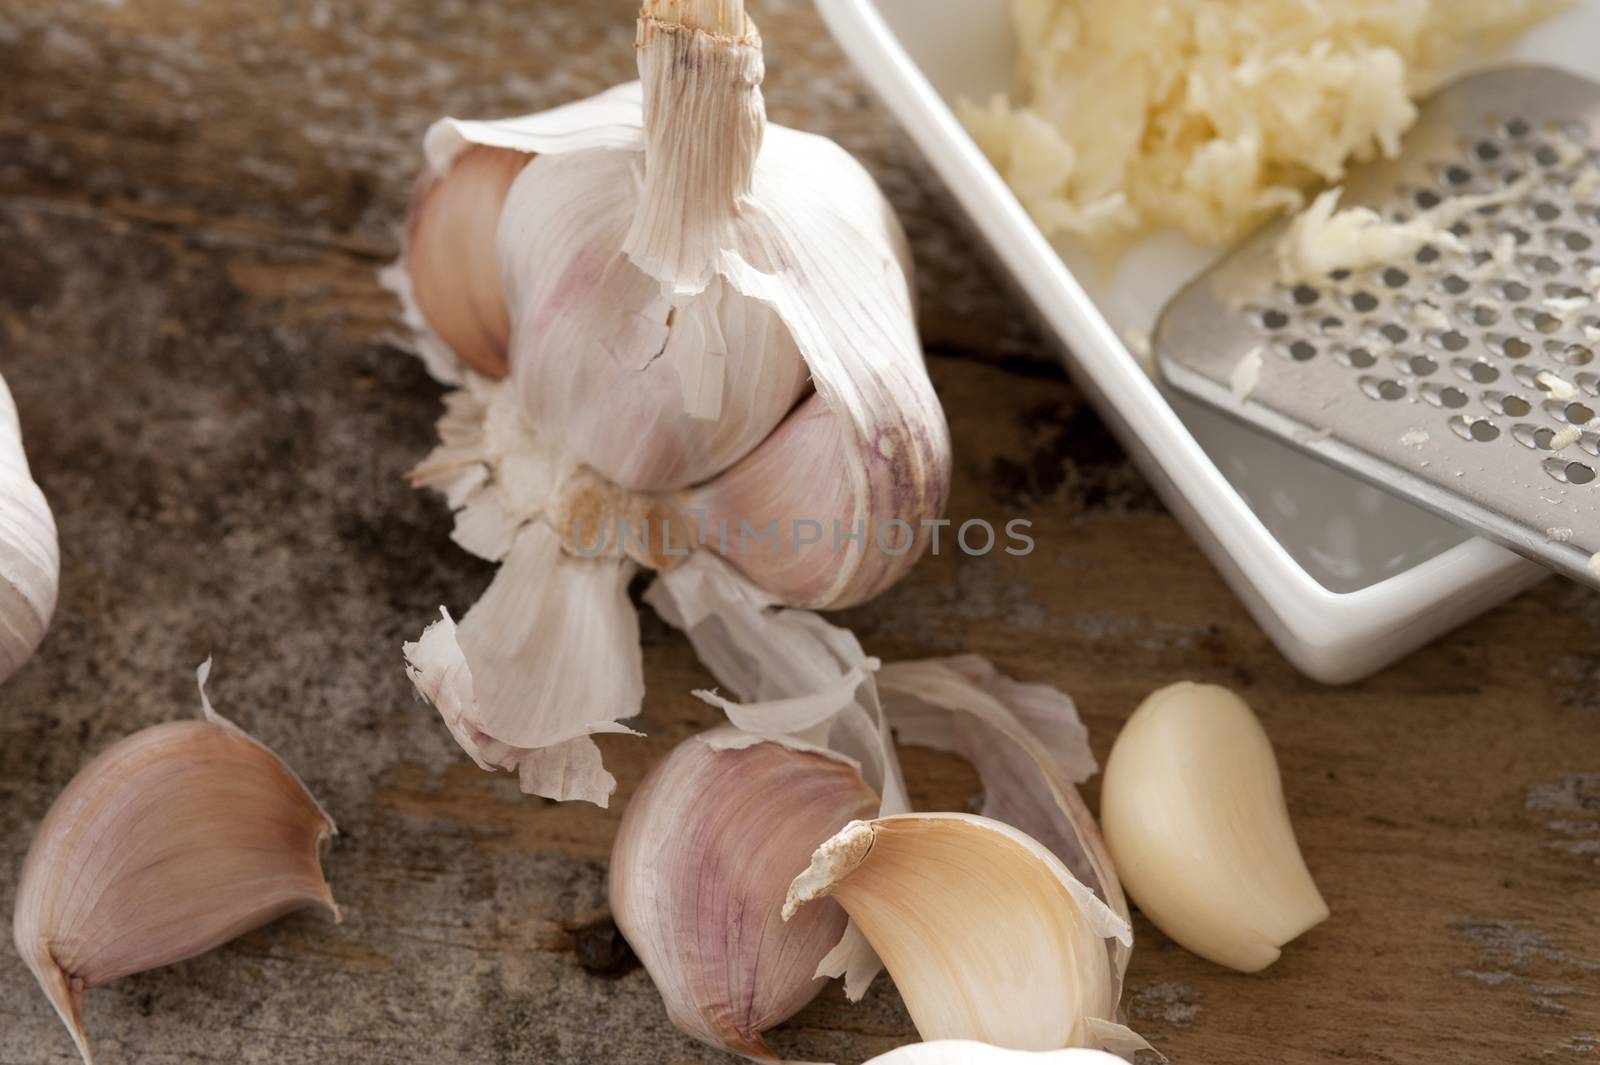 Preparing grated garlic for cooking with a fresh garlic bulb,, loose cloves both peeled and with skin on alongside a dish with a stainless steel grater